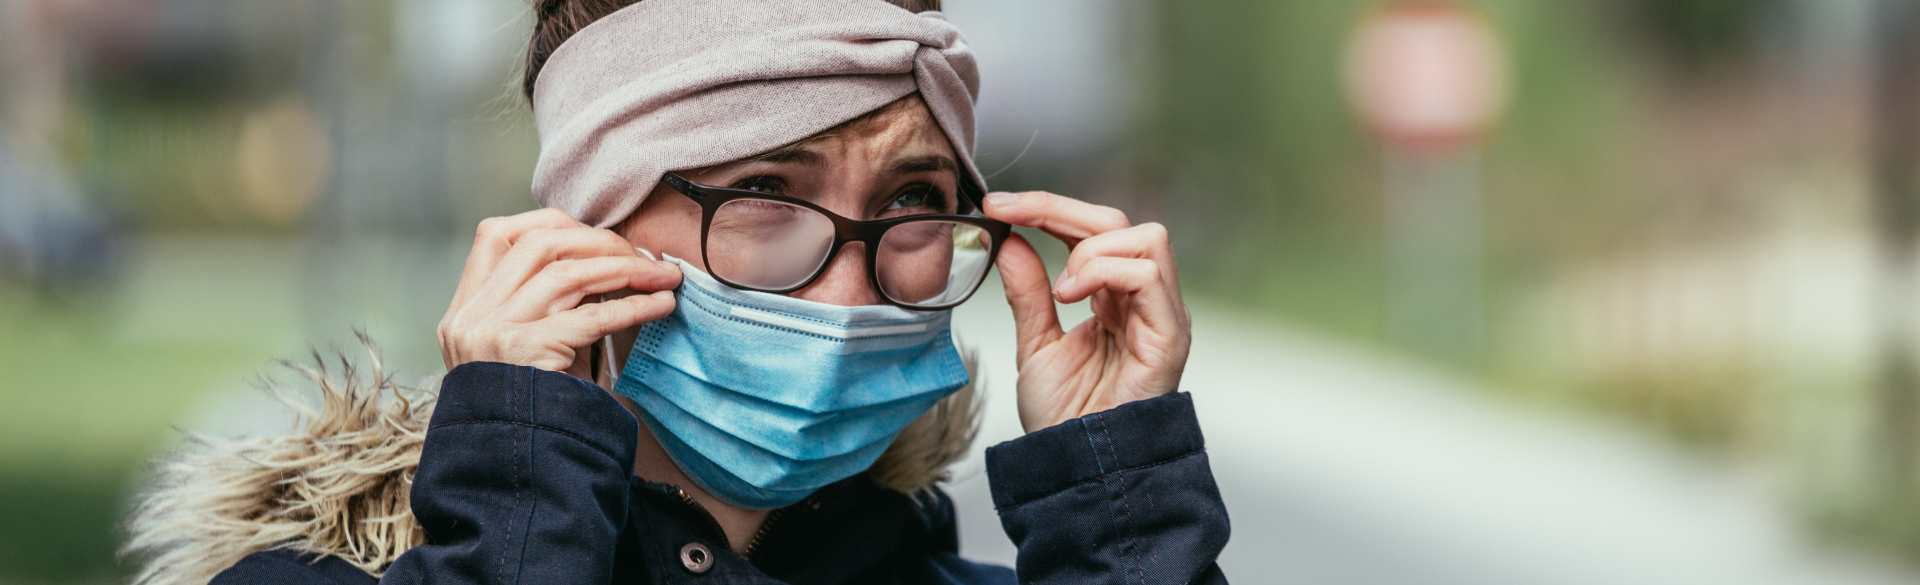 A Look at How Pandemic Response Impacted Eye Health